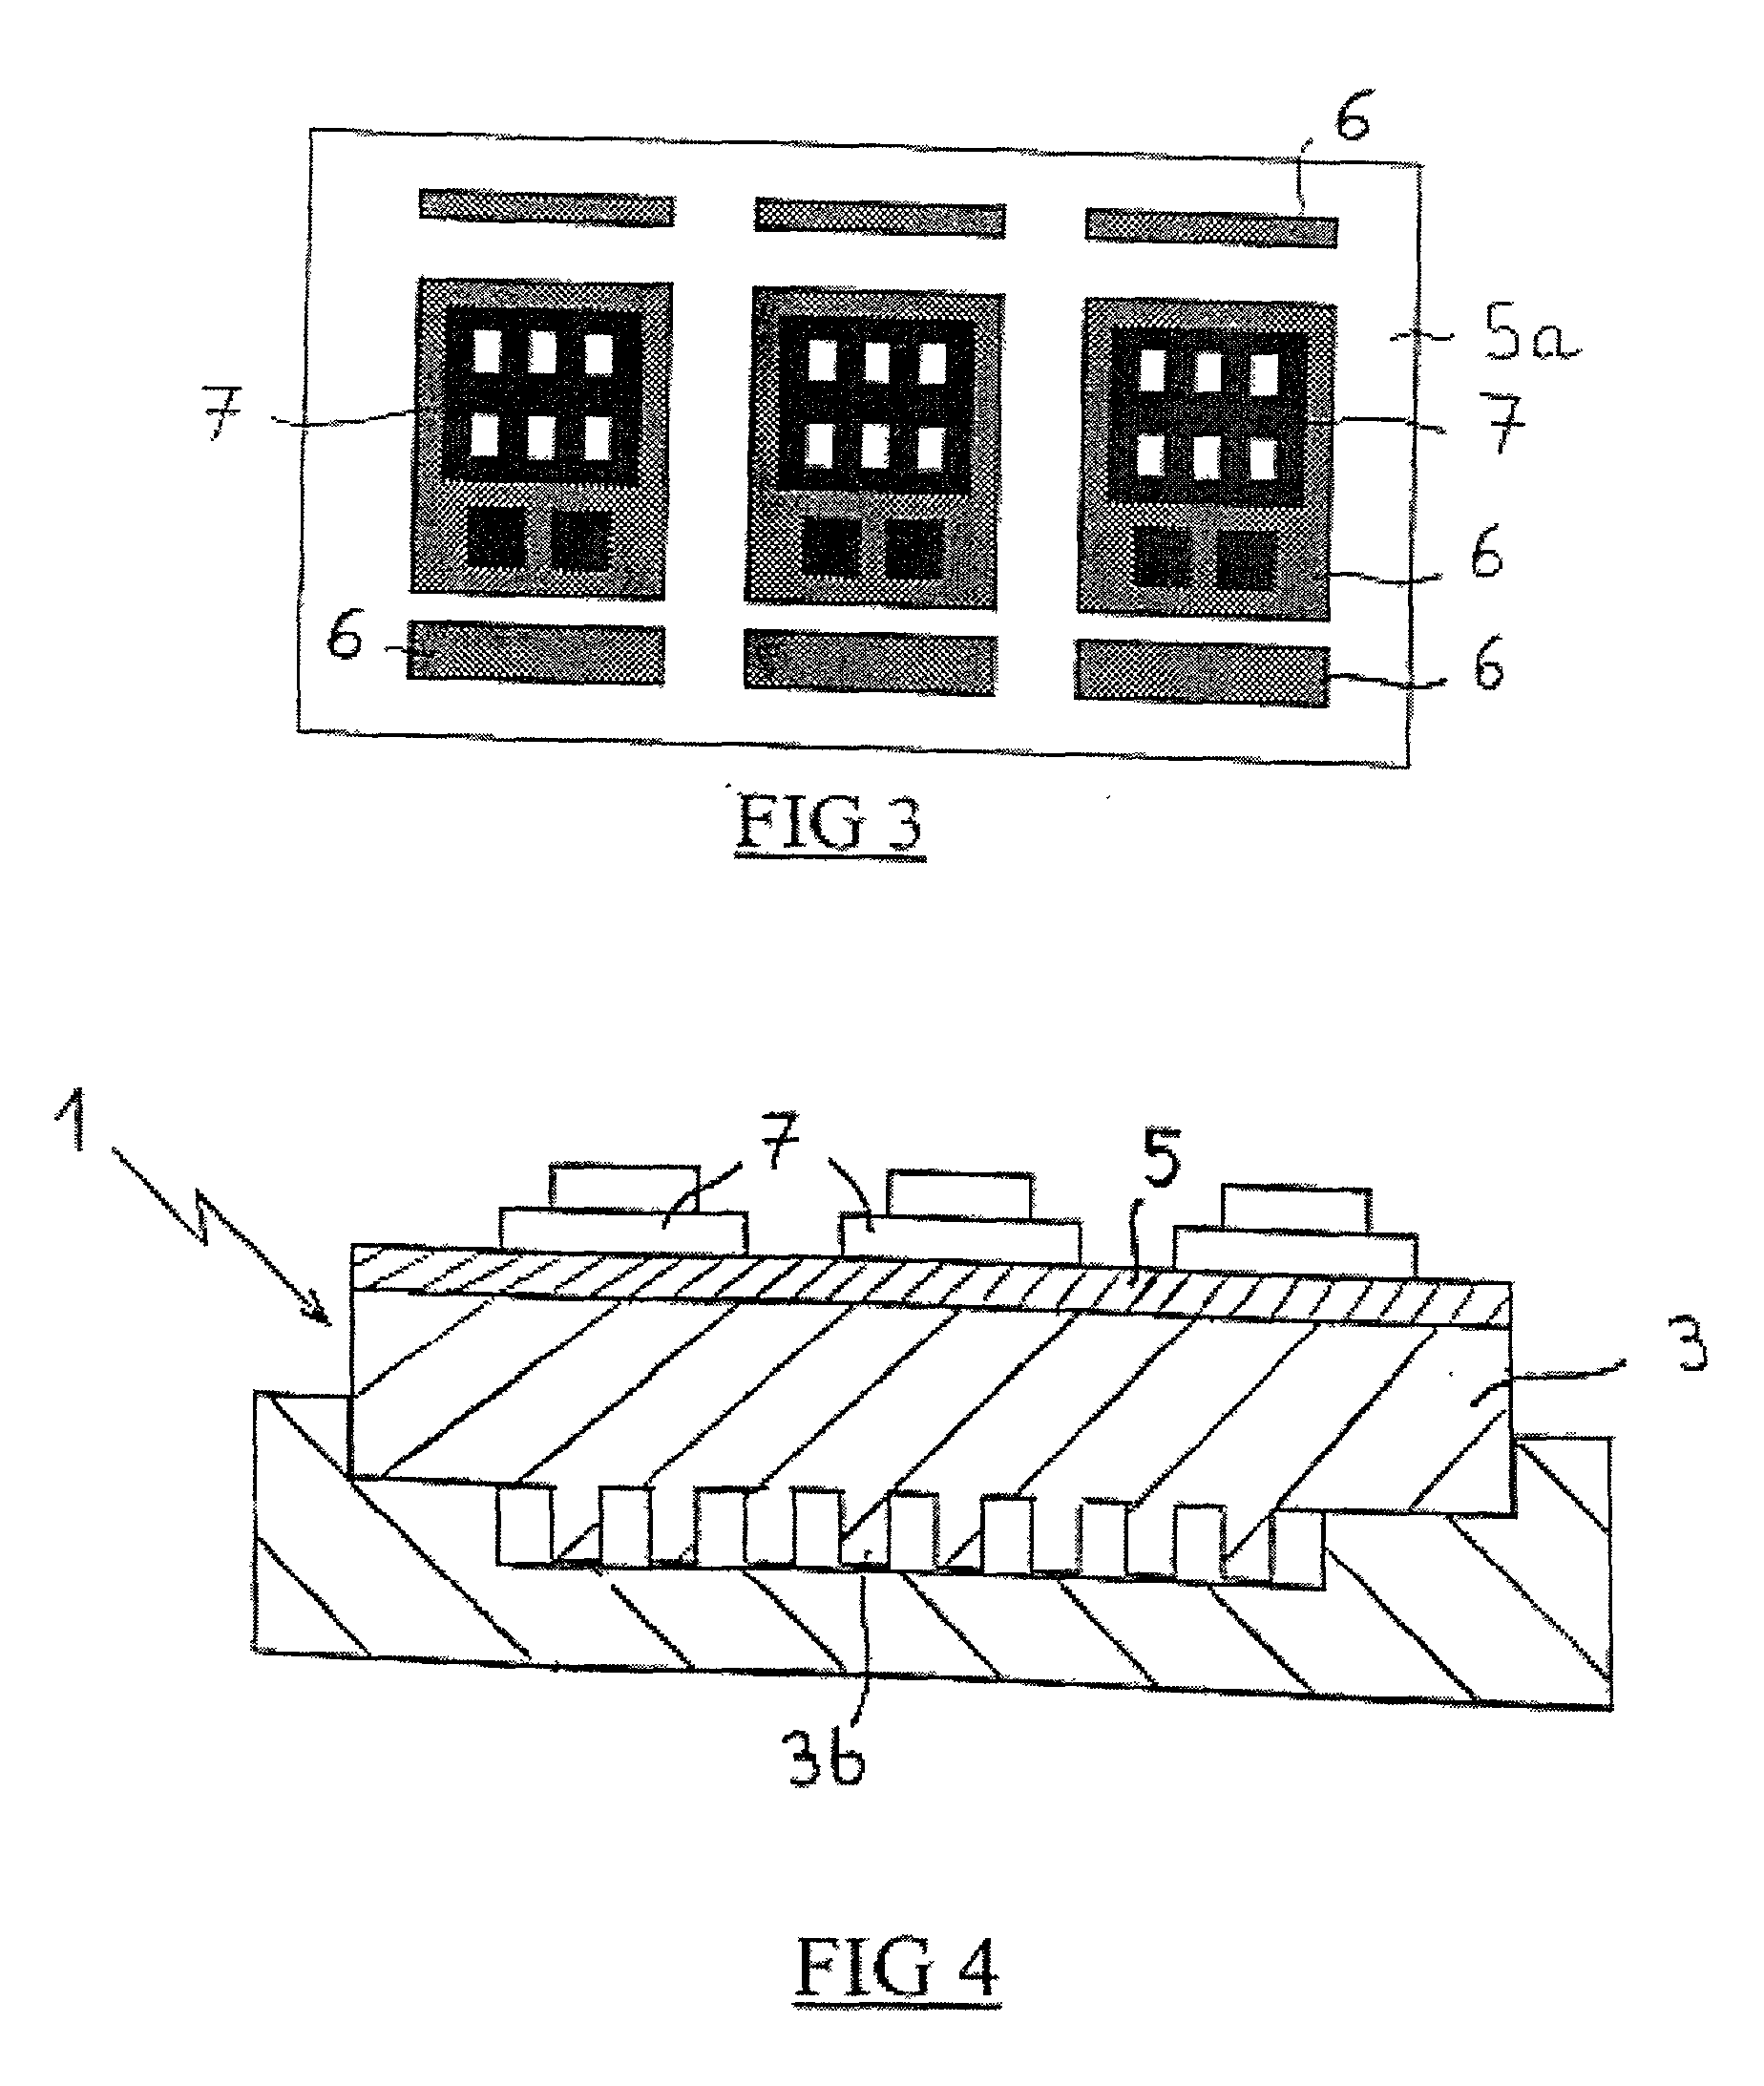 Power module having electronic power components, and a method of manufacturing such a module